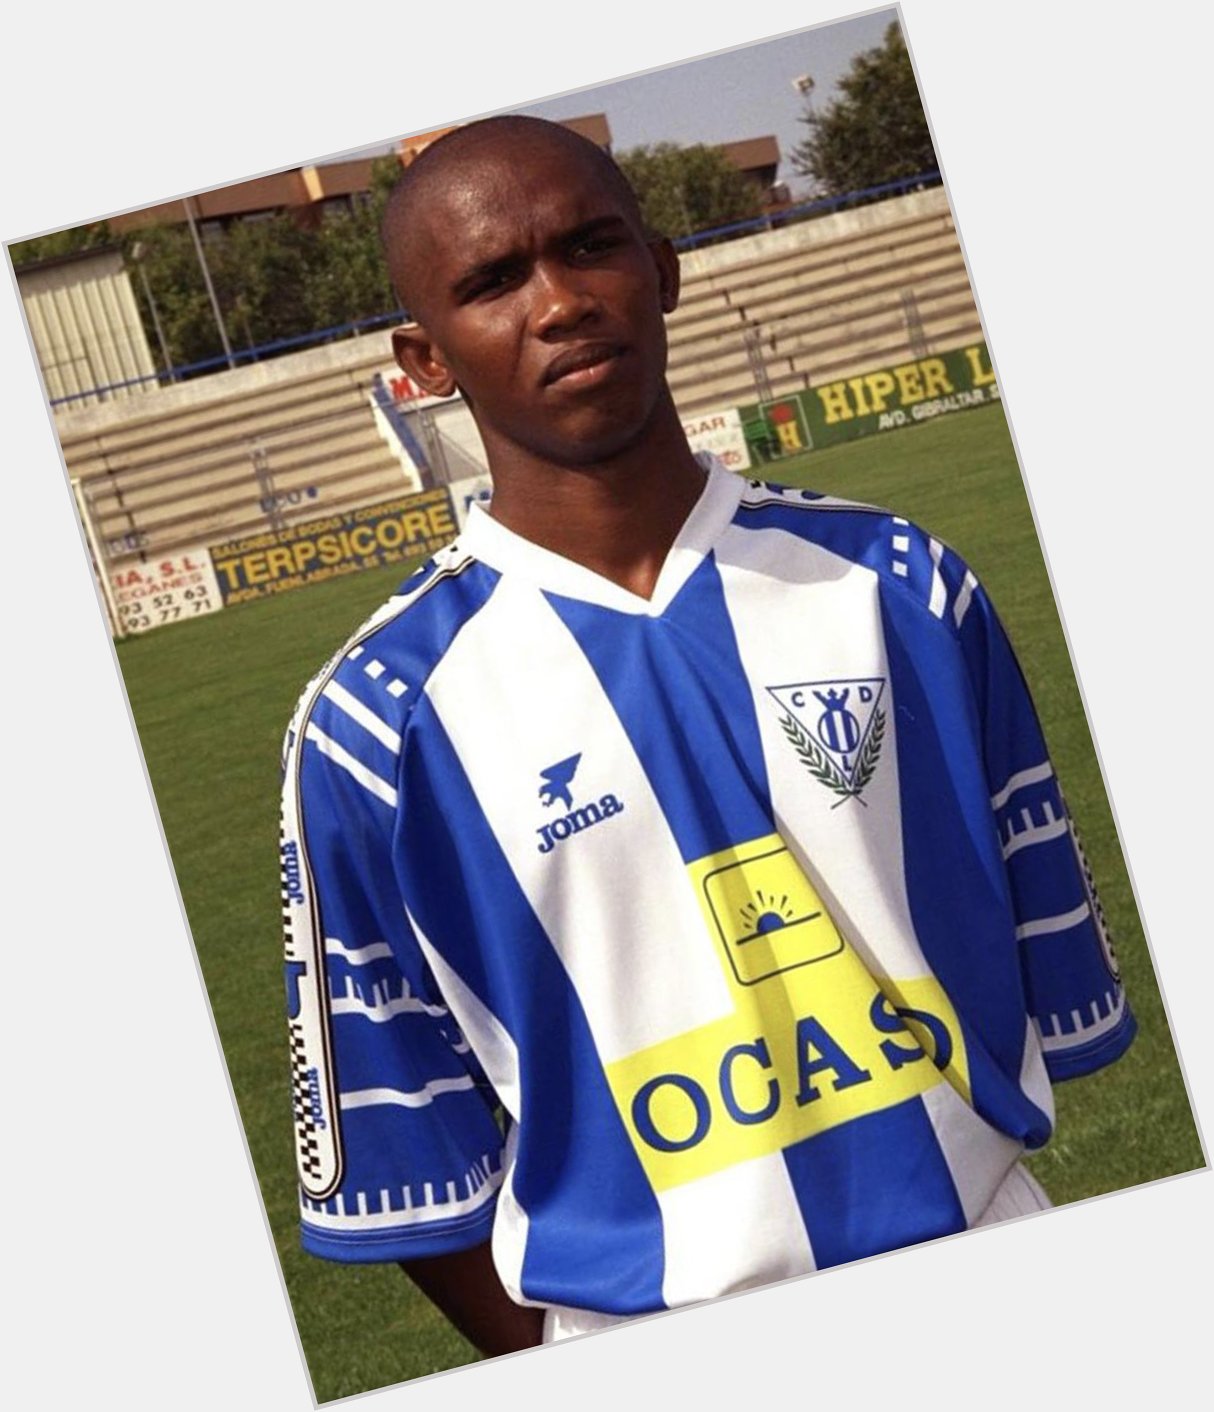 764 professional appearances
371 career goals
13 different clubs
1 Samuel Eto o. 

Happy Birthday to this baller 